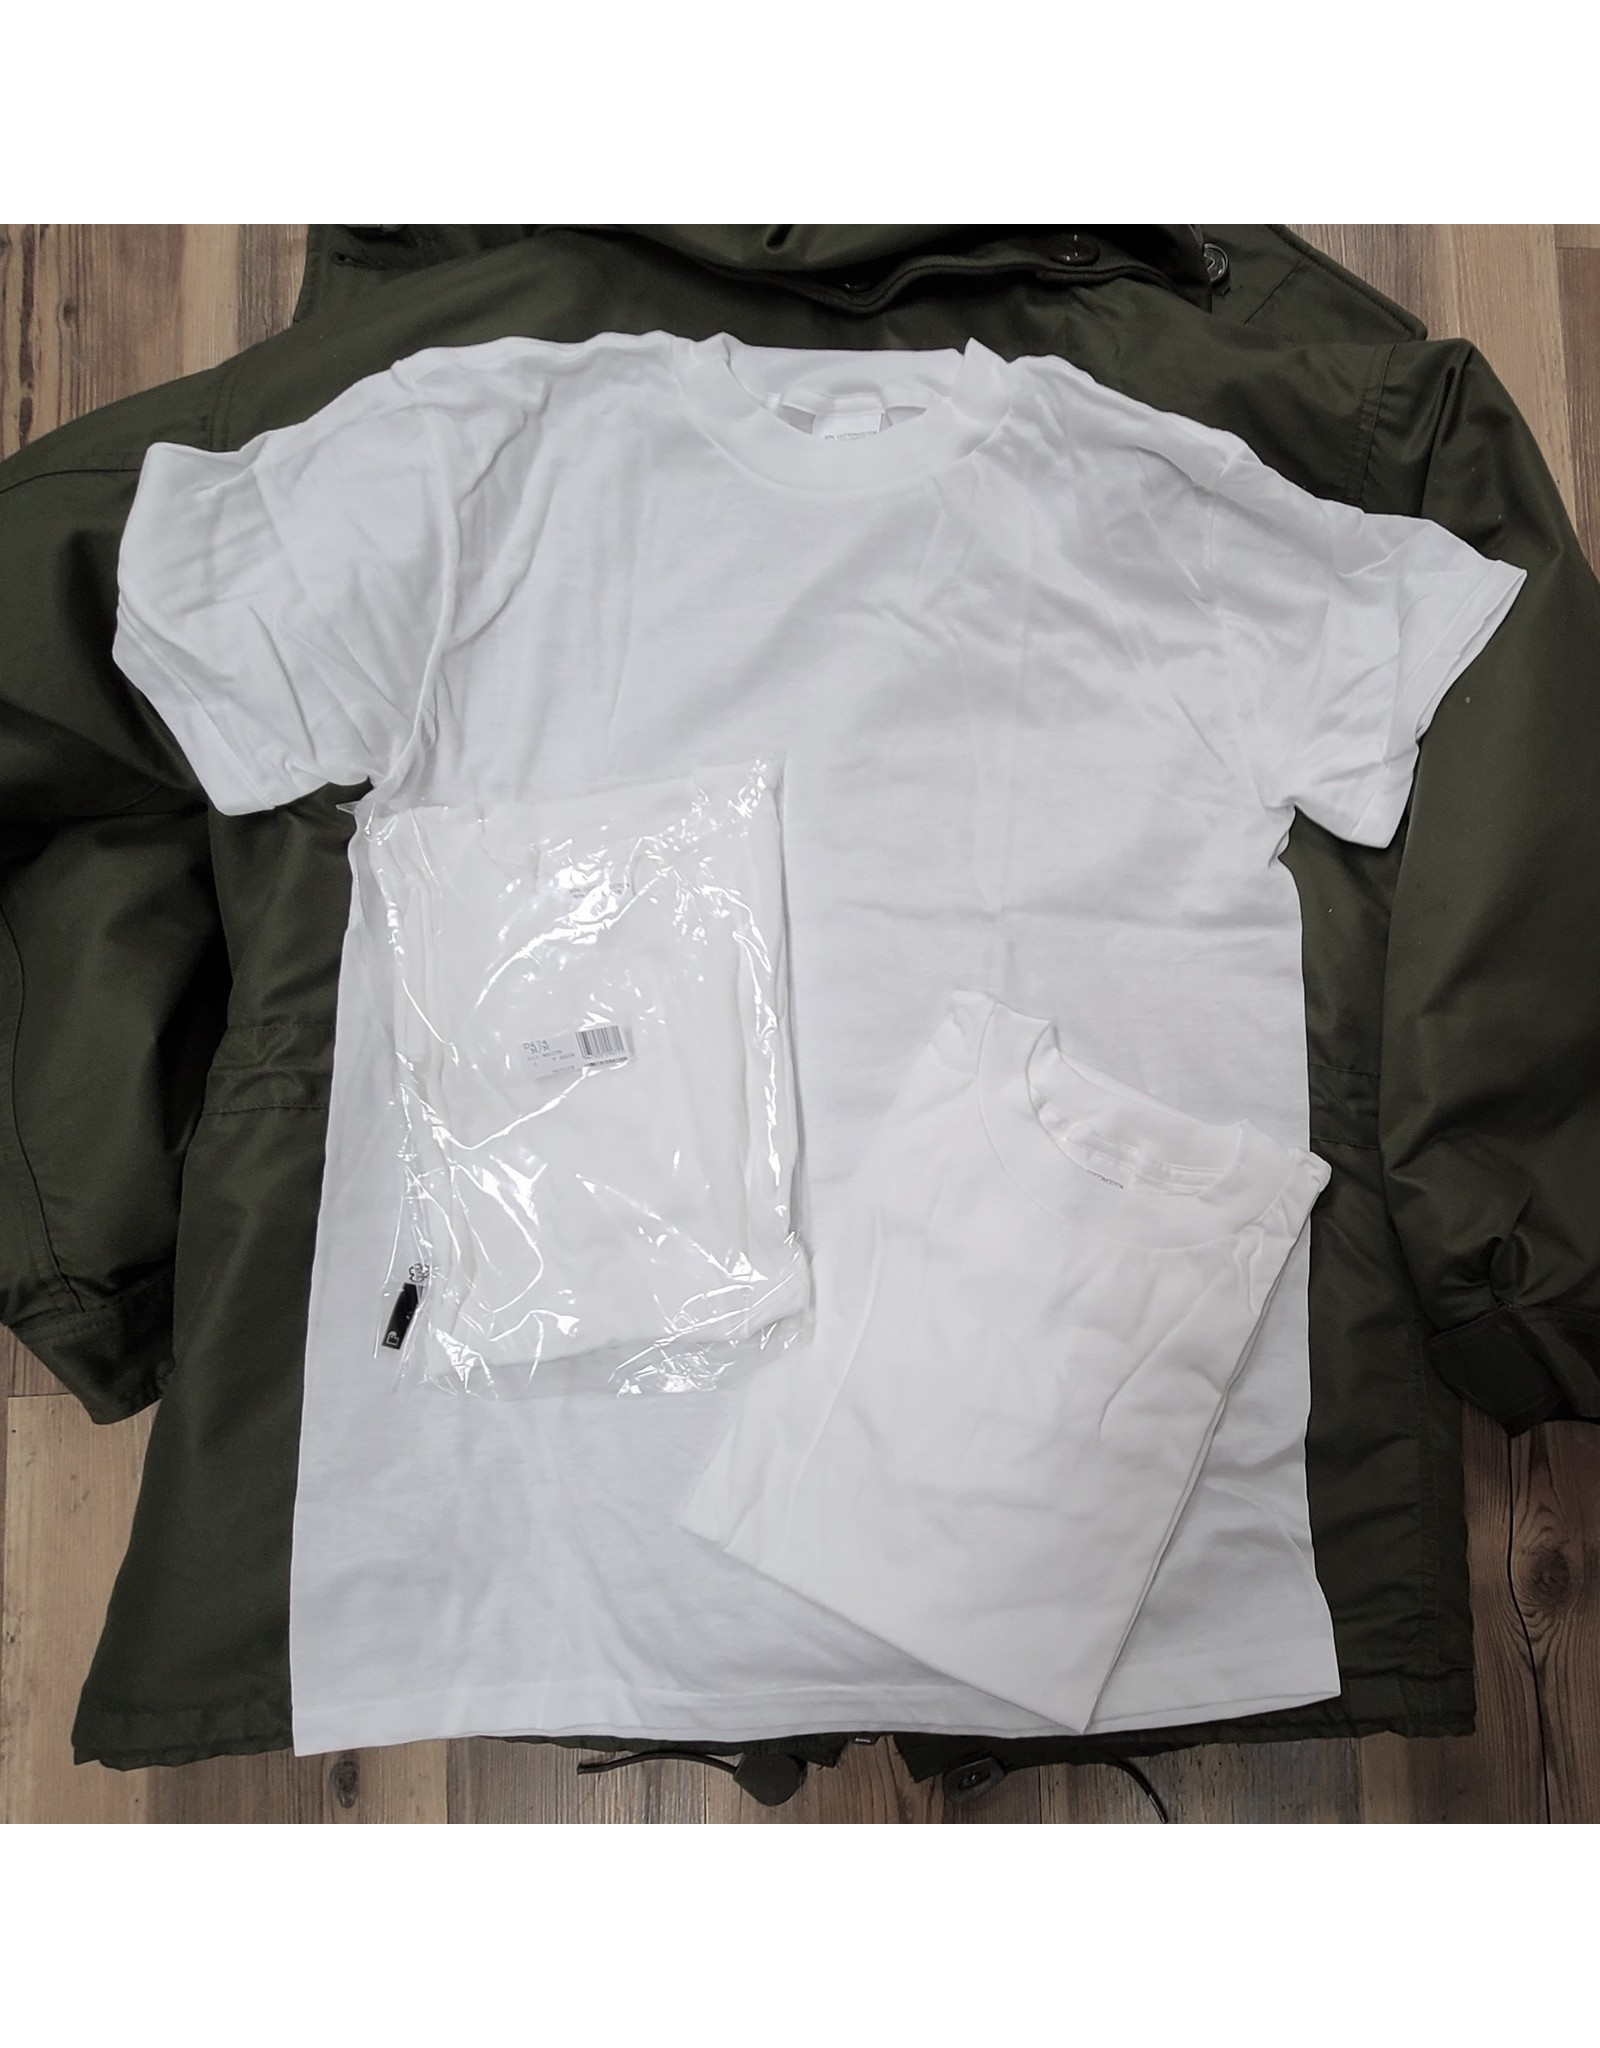 SURPLUS 3 PACK OF WHITE T-SHIRTS